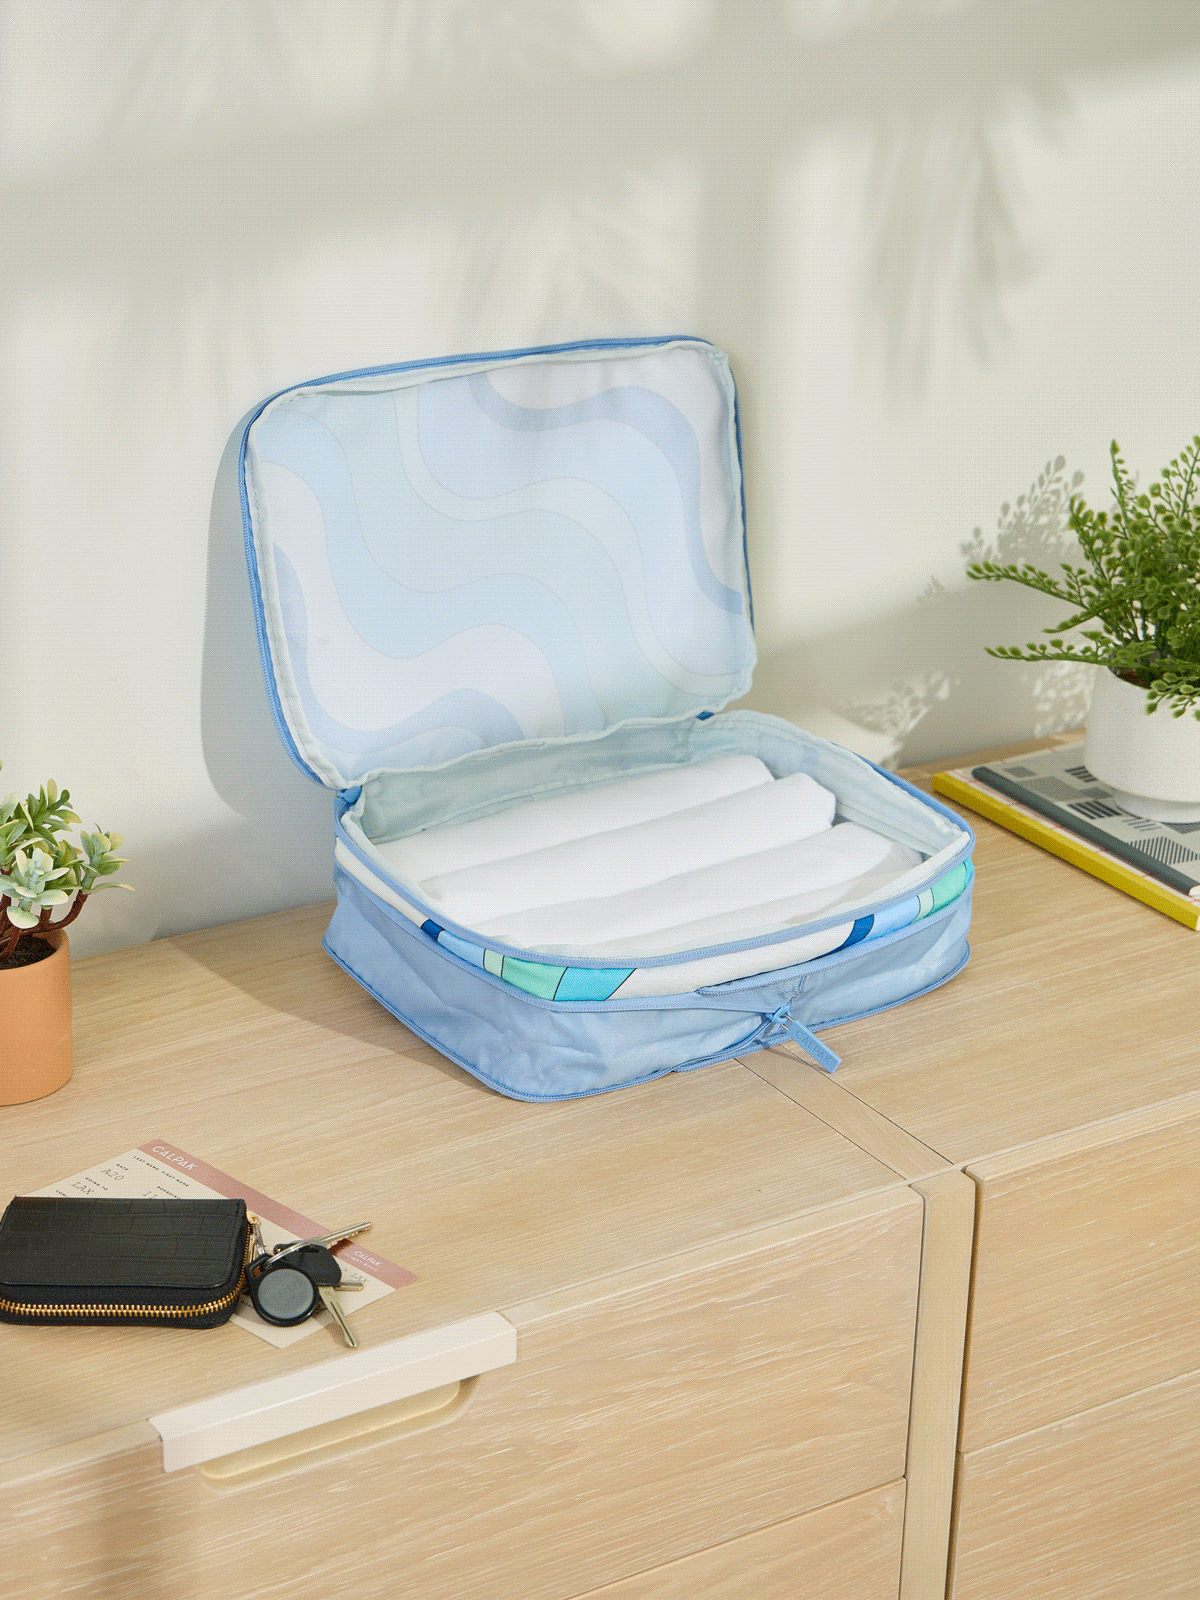 CALPAK Medium Compression Packing Cubes made of durable material and expandable by 4.5" in groovy blue